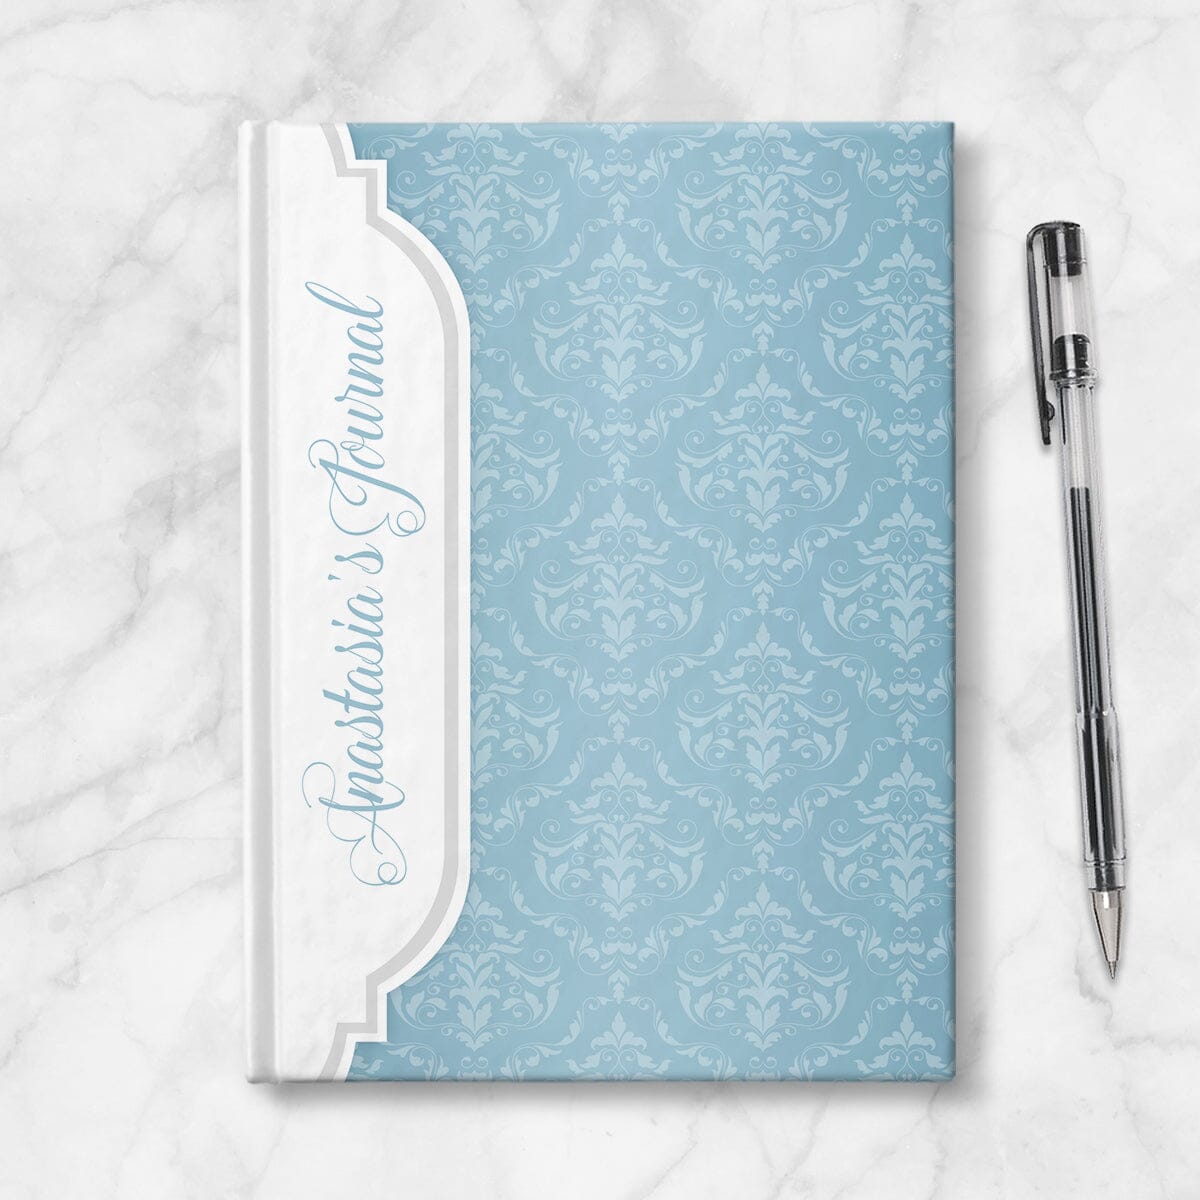 Personalized Blue Damask Journal at Artistically Invited. Image shows the book on a countertop next to a pen.